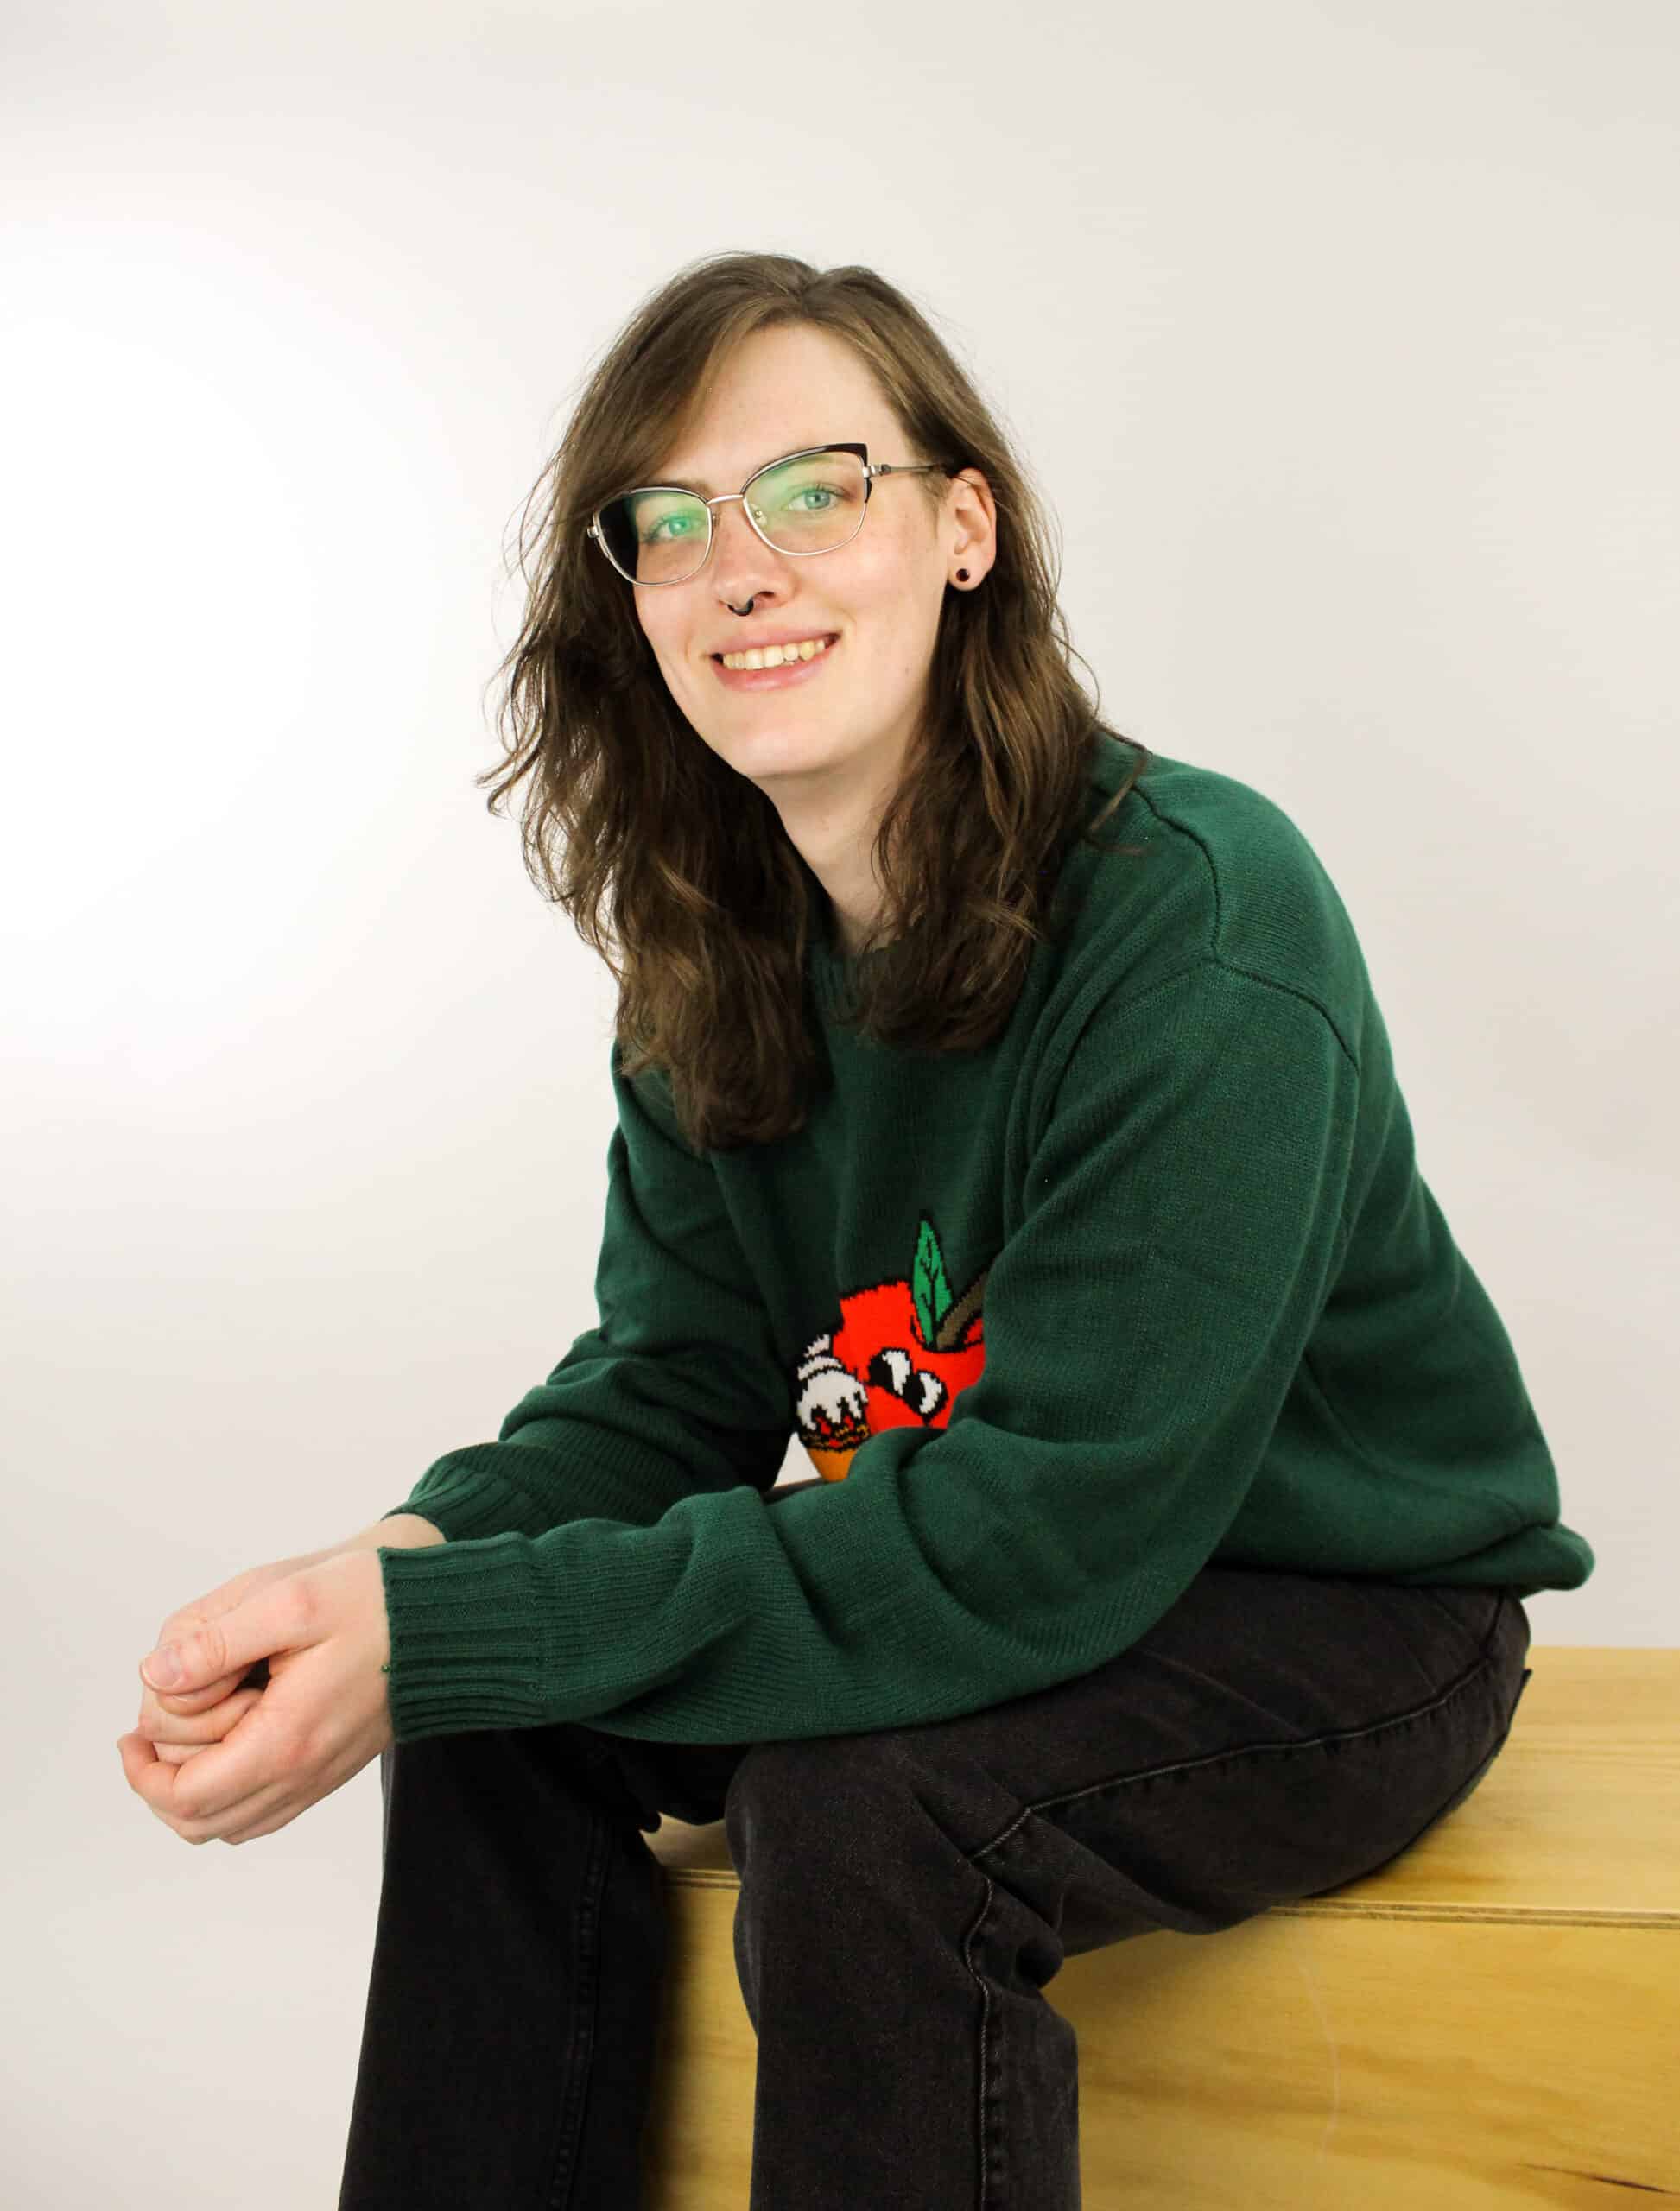 Sagen wears black jeans and a dark green sweater with red embroidery. She smiles at the camera. She has wavy brown shoulder length hair, glasses, and a black septum ring. 